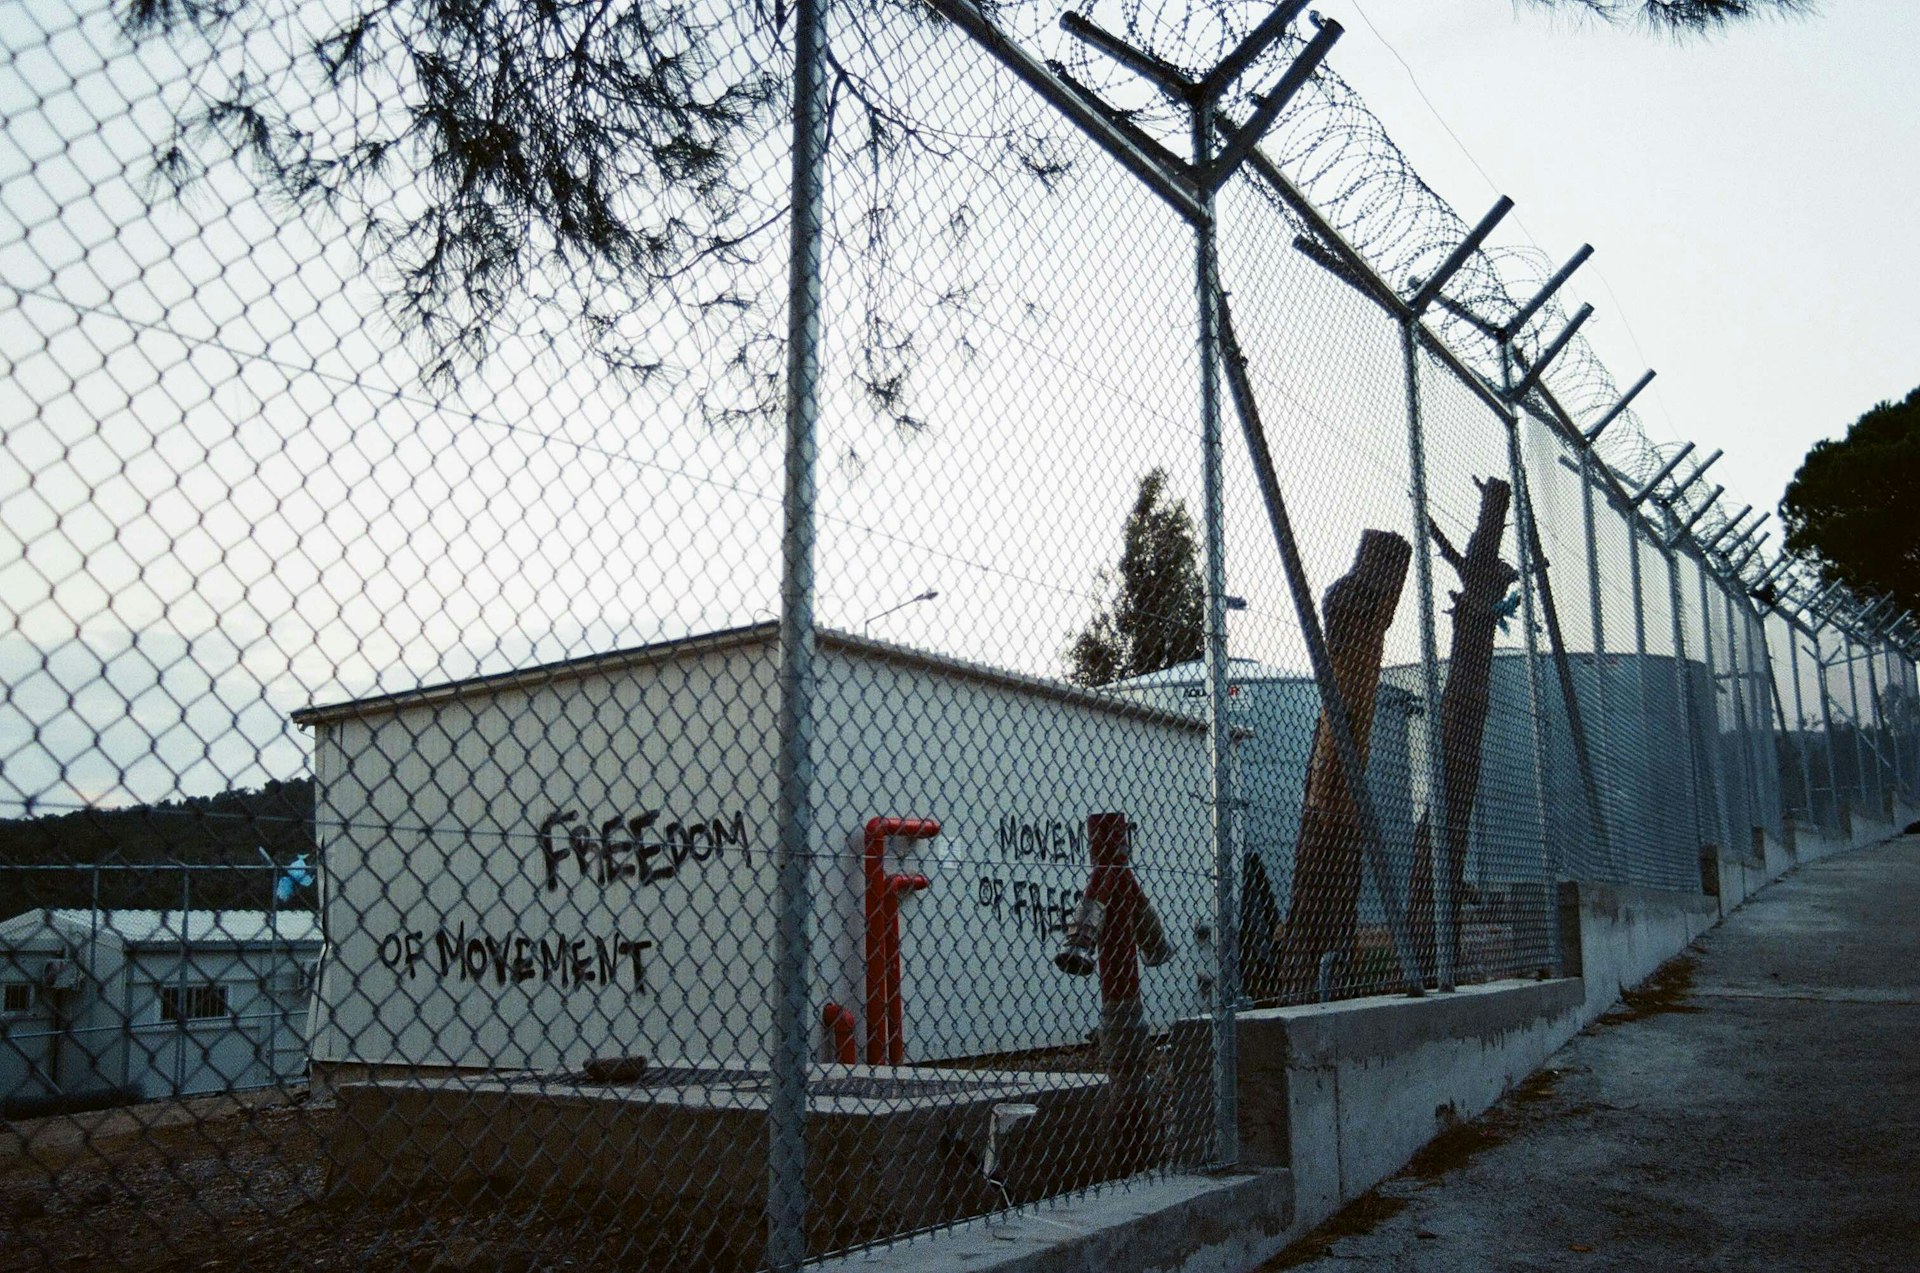 Camp Moria perimiter fence. Photo by Tom Bailey